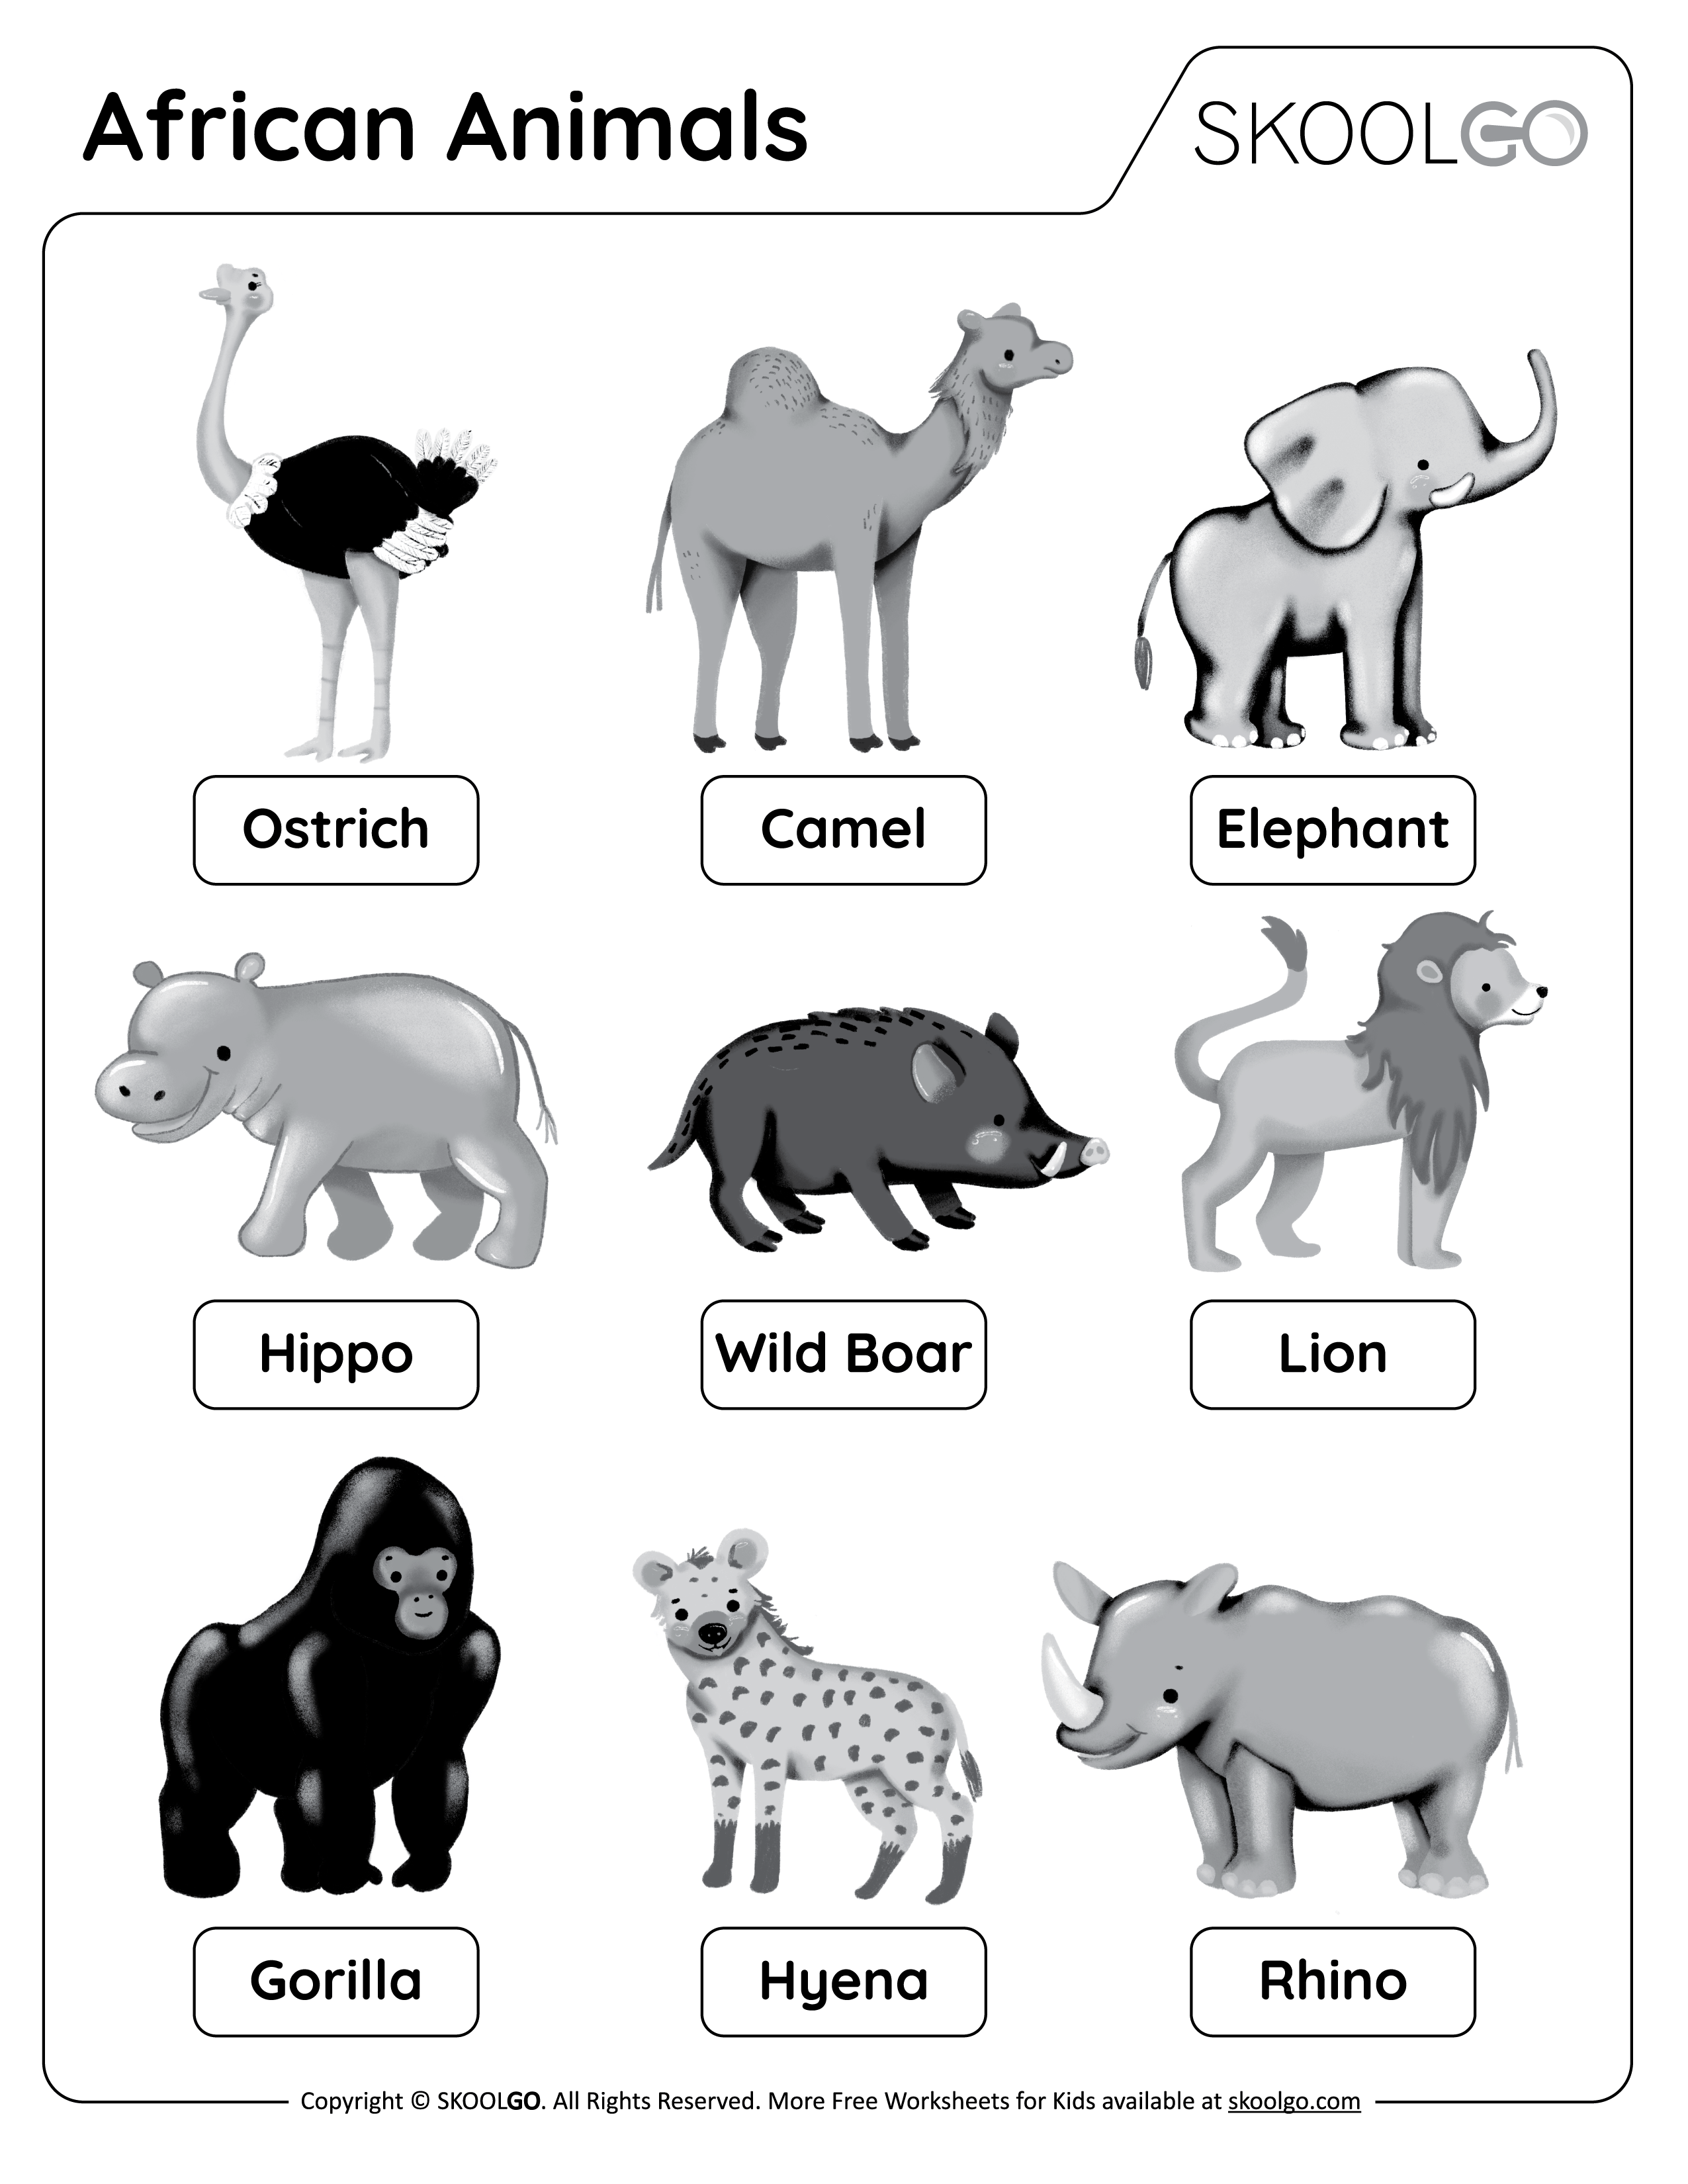 African Animals - Free Worksheet for Kids - Black and White